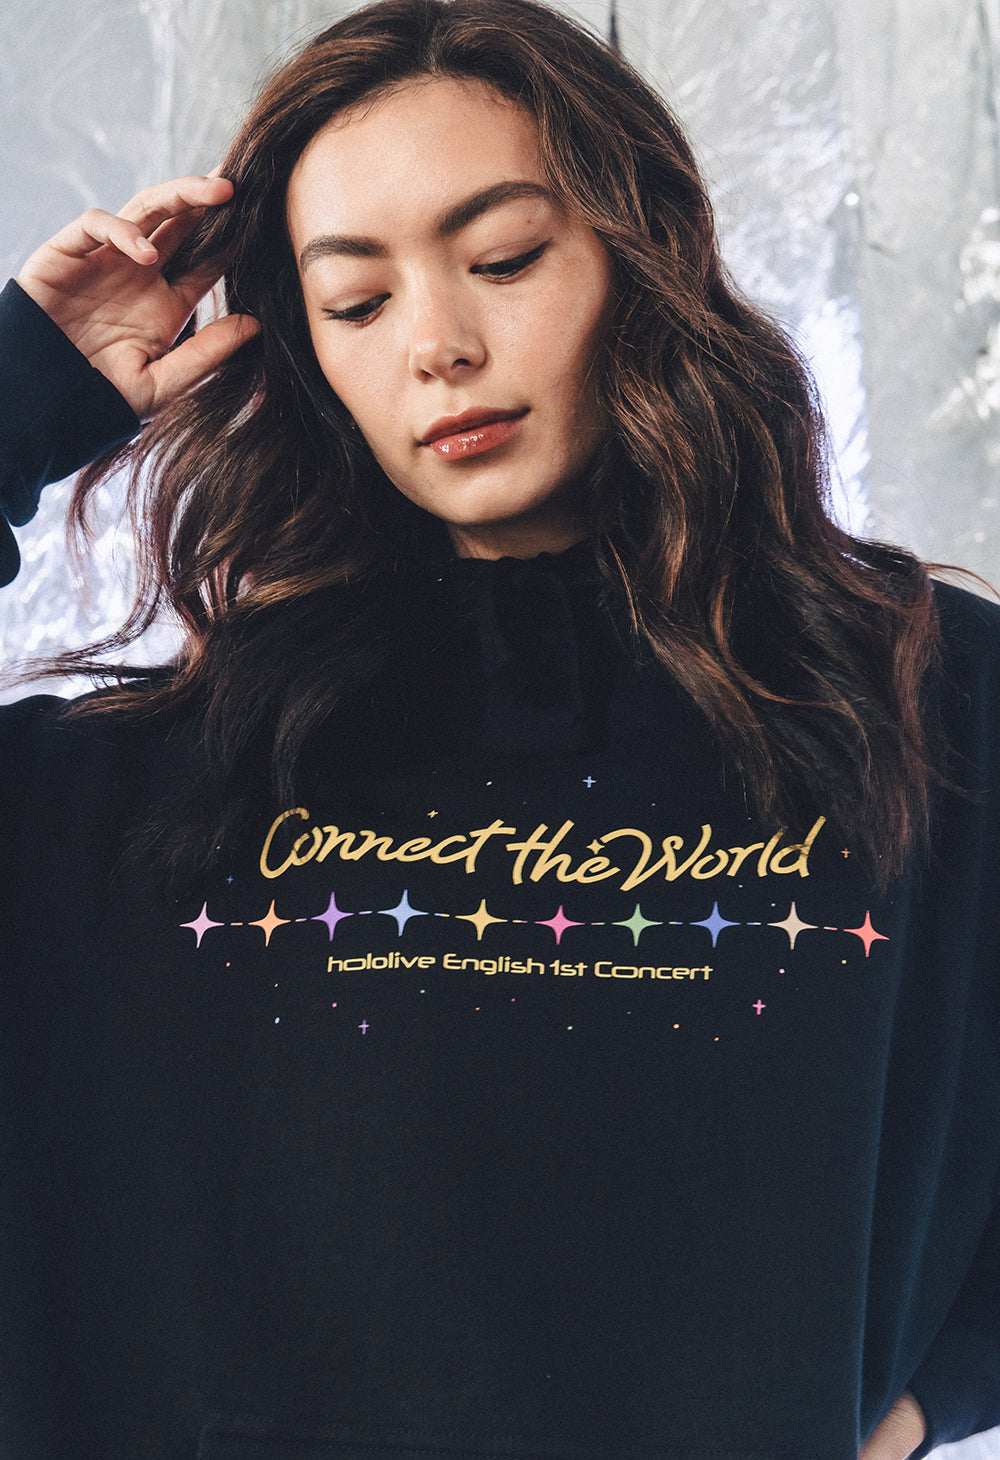 
                  
                    Connect the World Hoodie
                  
                